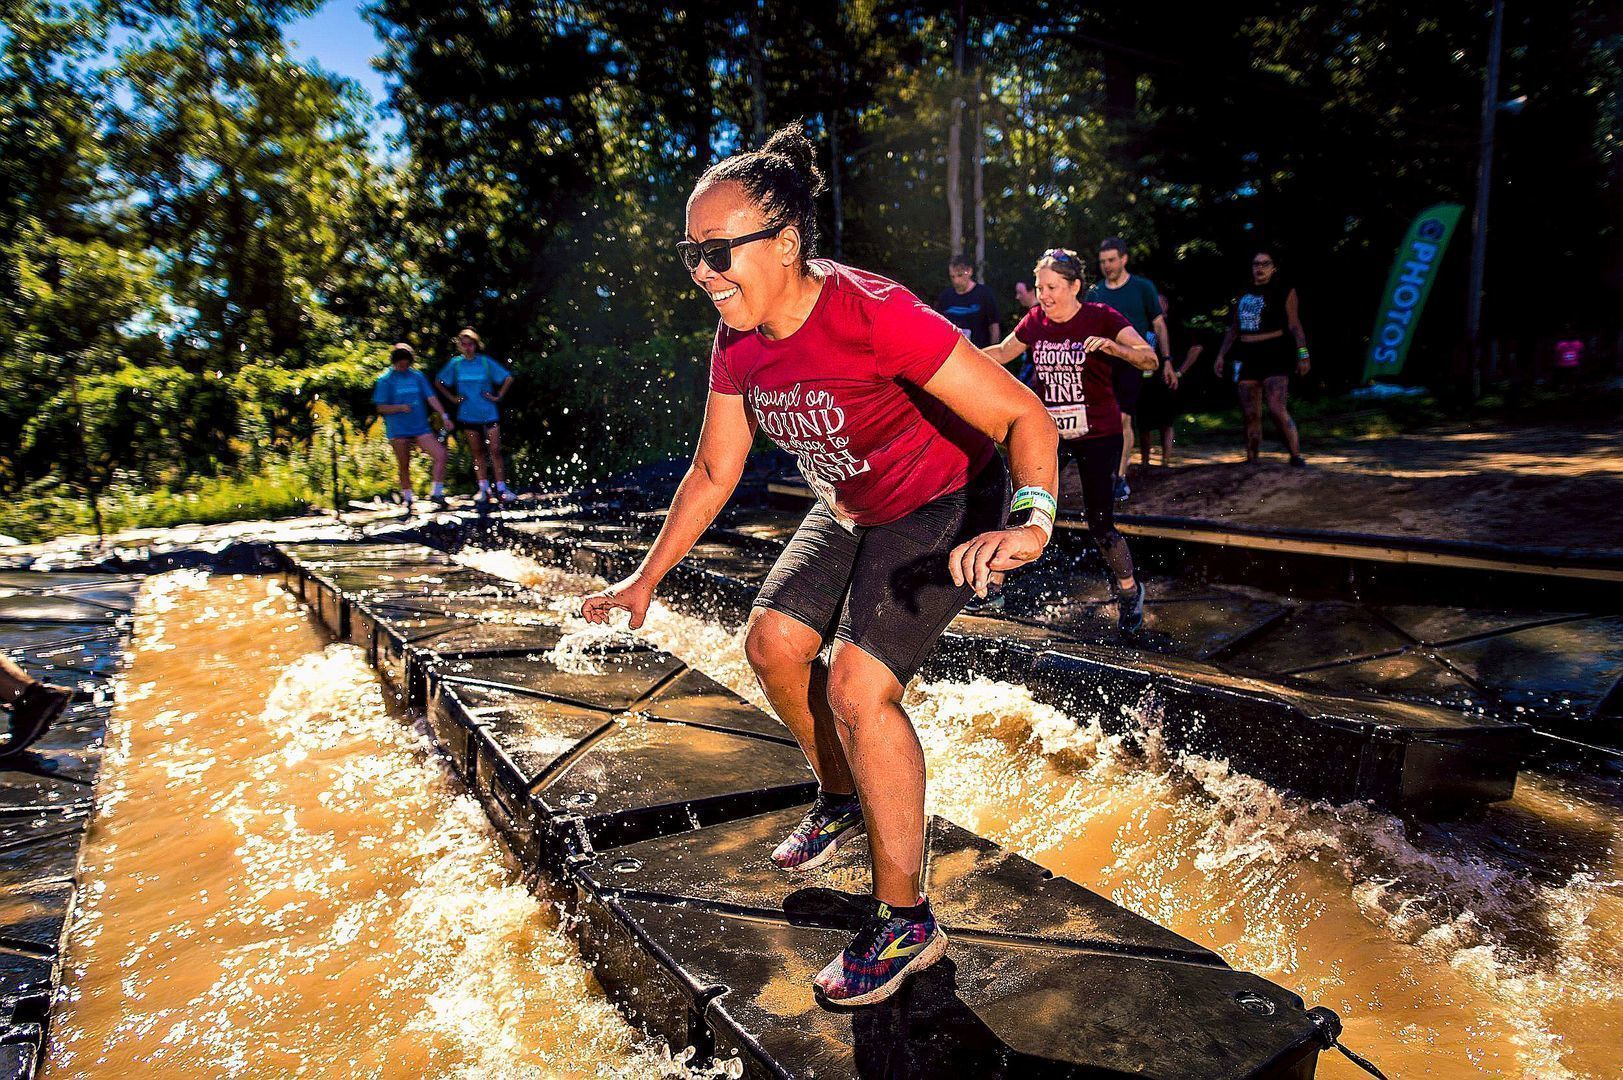 Rugged Maniac 5K Obstacle Course - New England, Southwick, Massachusetts, United States